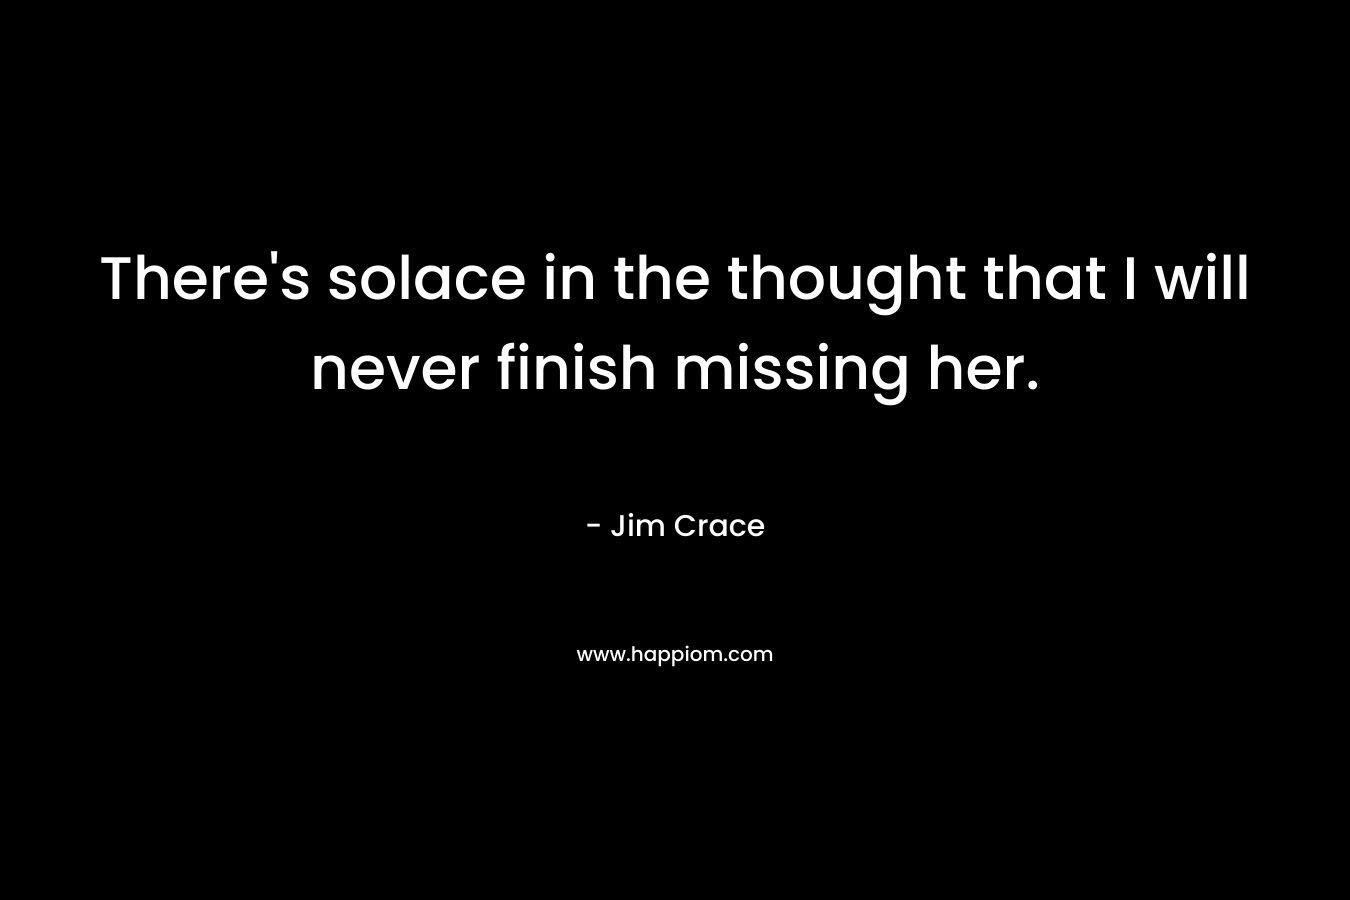 There’s solace in the thought that I will never finish missing her. – Jim Crace